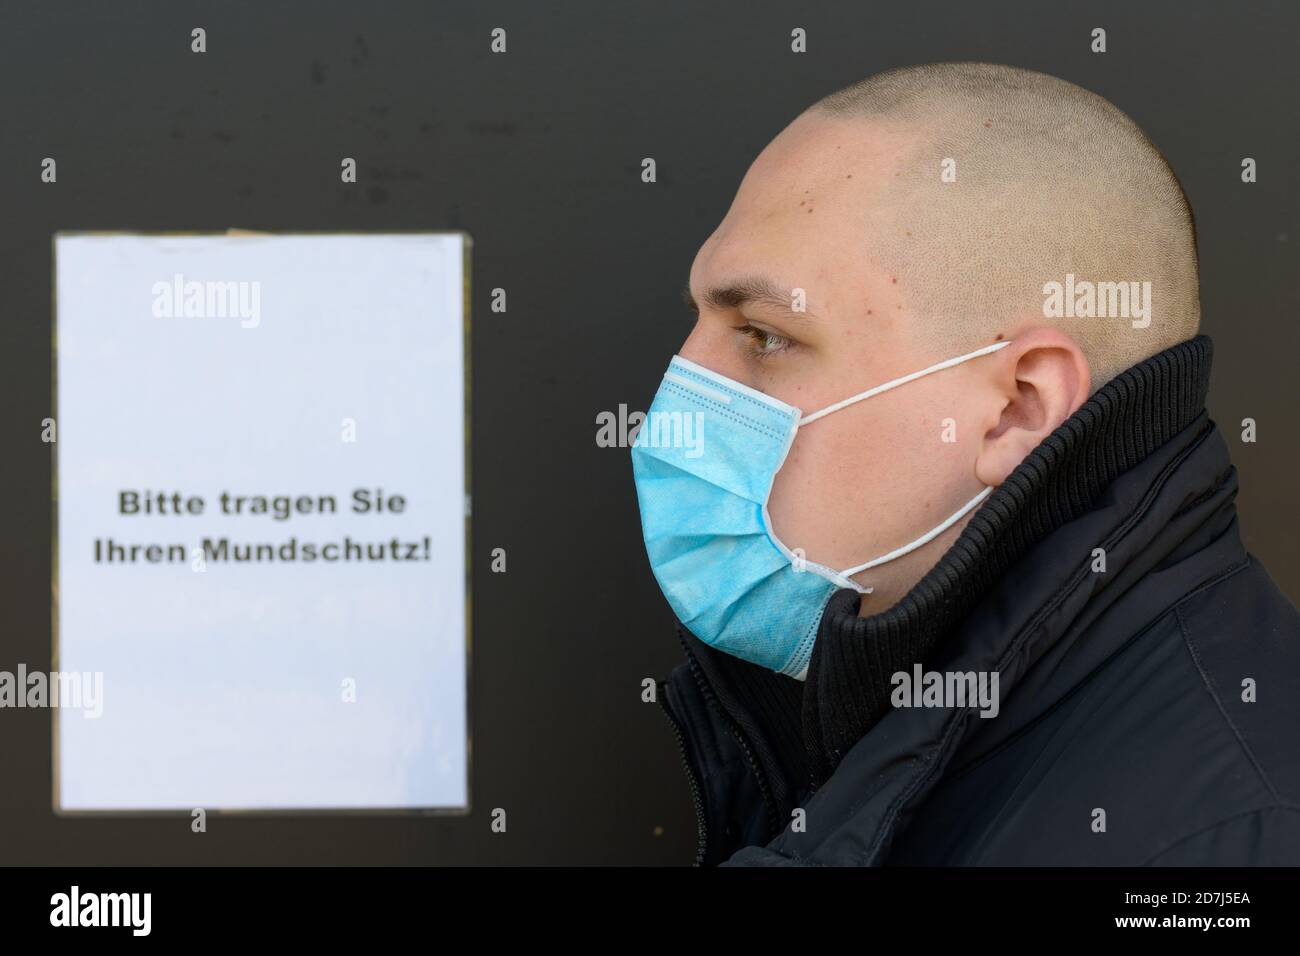 Profile of a young man wearing a face mask for infection control during the Covid-19 pandemic standing in front of a German text sign instructing peop Stock Photo